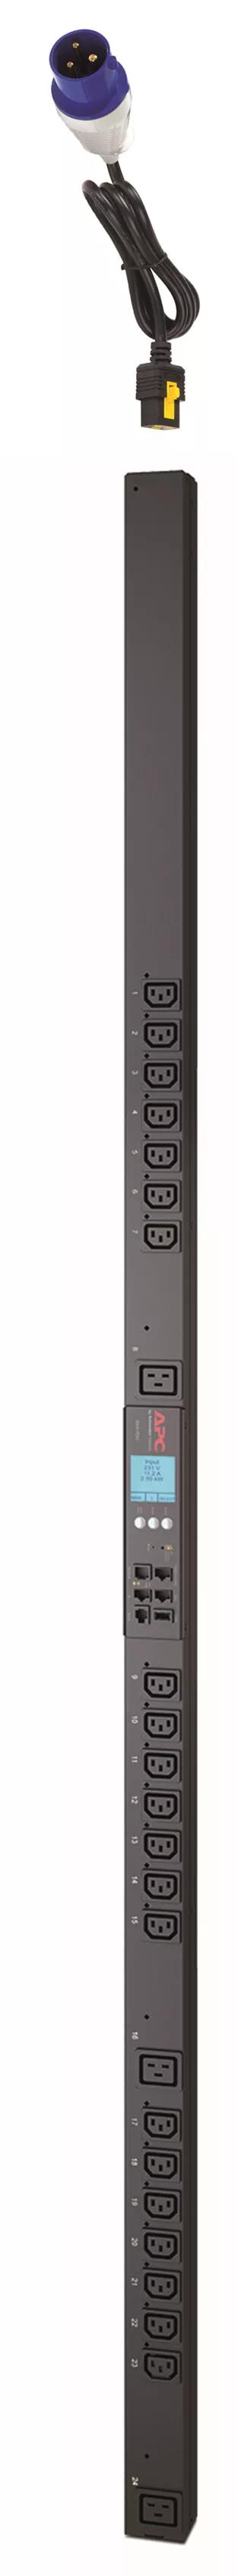 Vente APC Rack PDU 2G Metered by Outlet with Switching ZeroU au meilleur prix